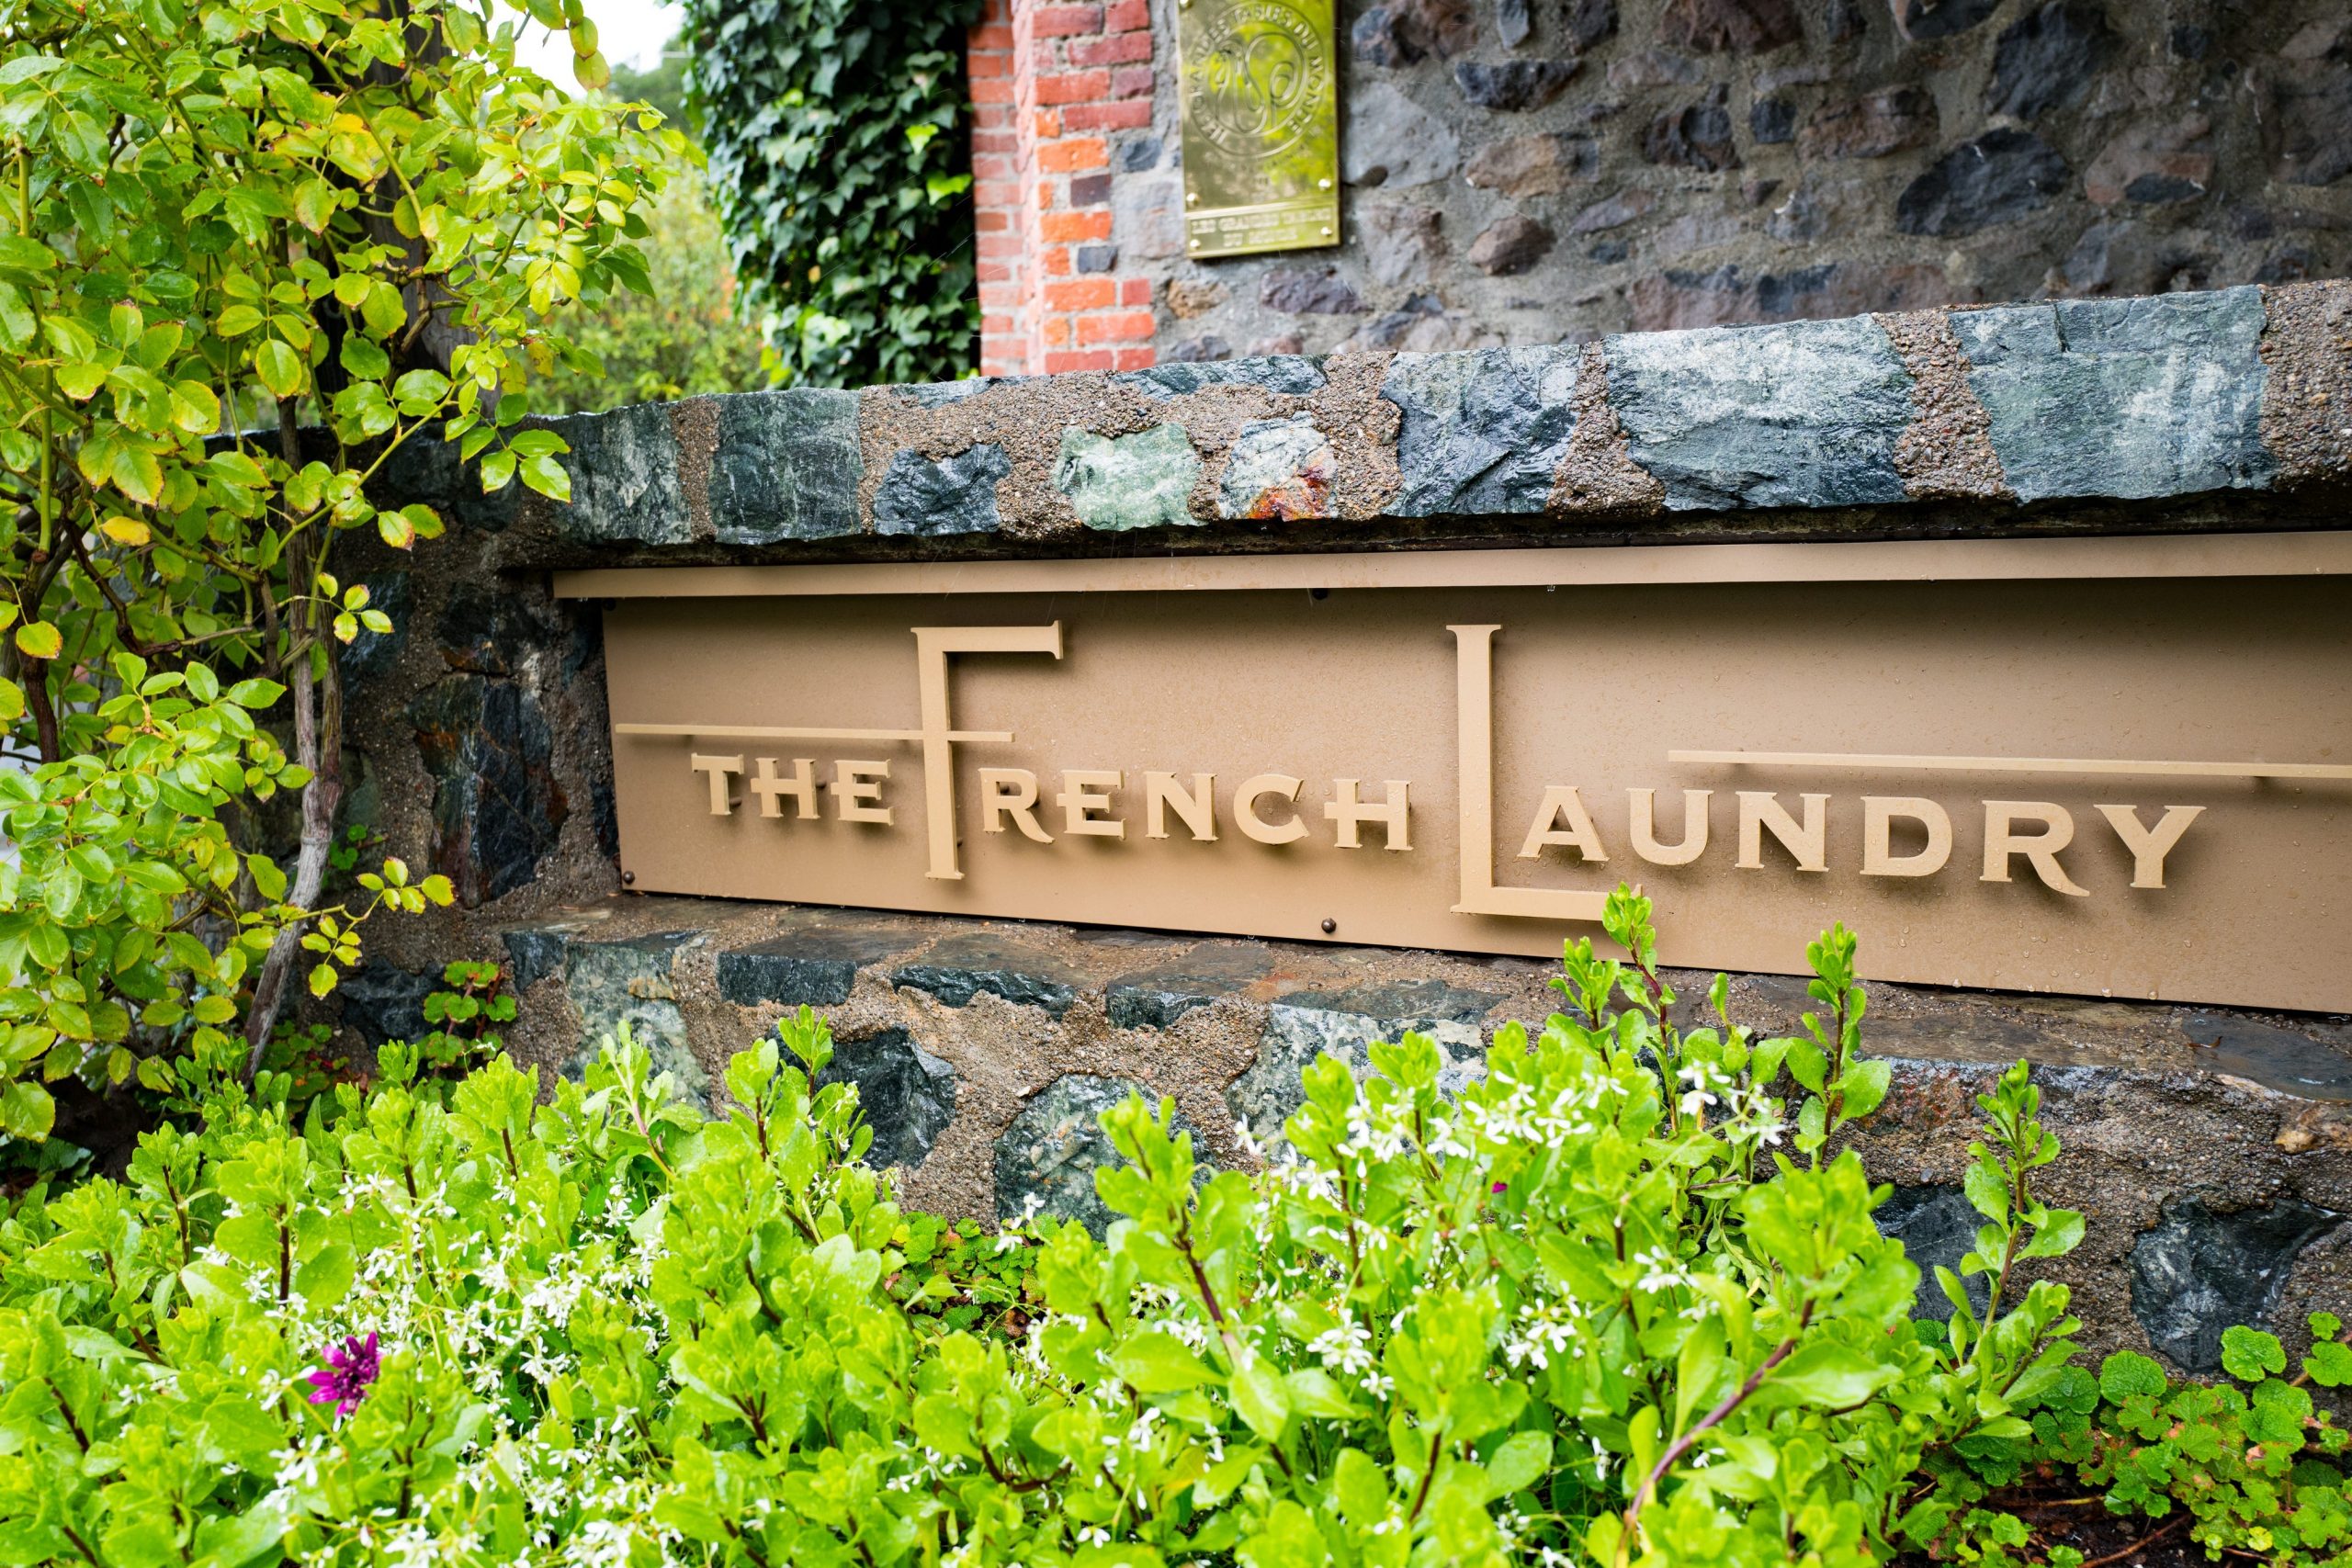 The French Laundry sign in Napa Valley County, California